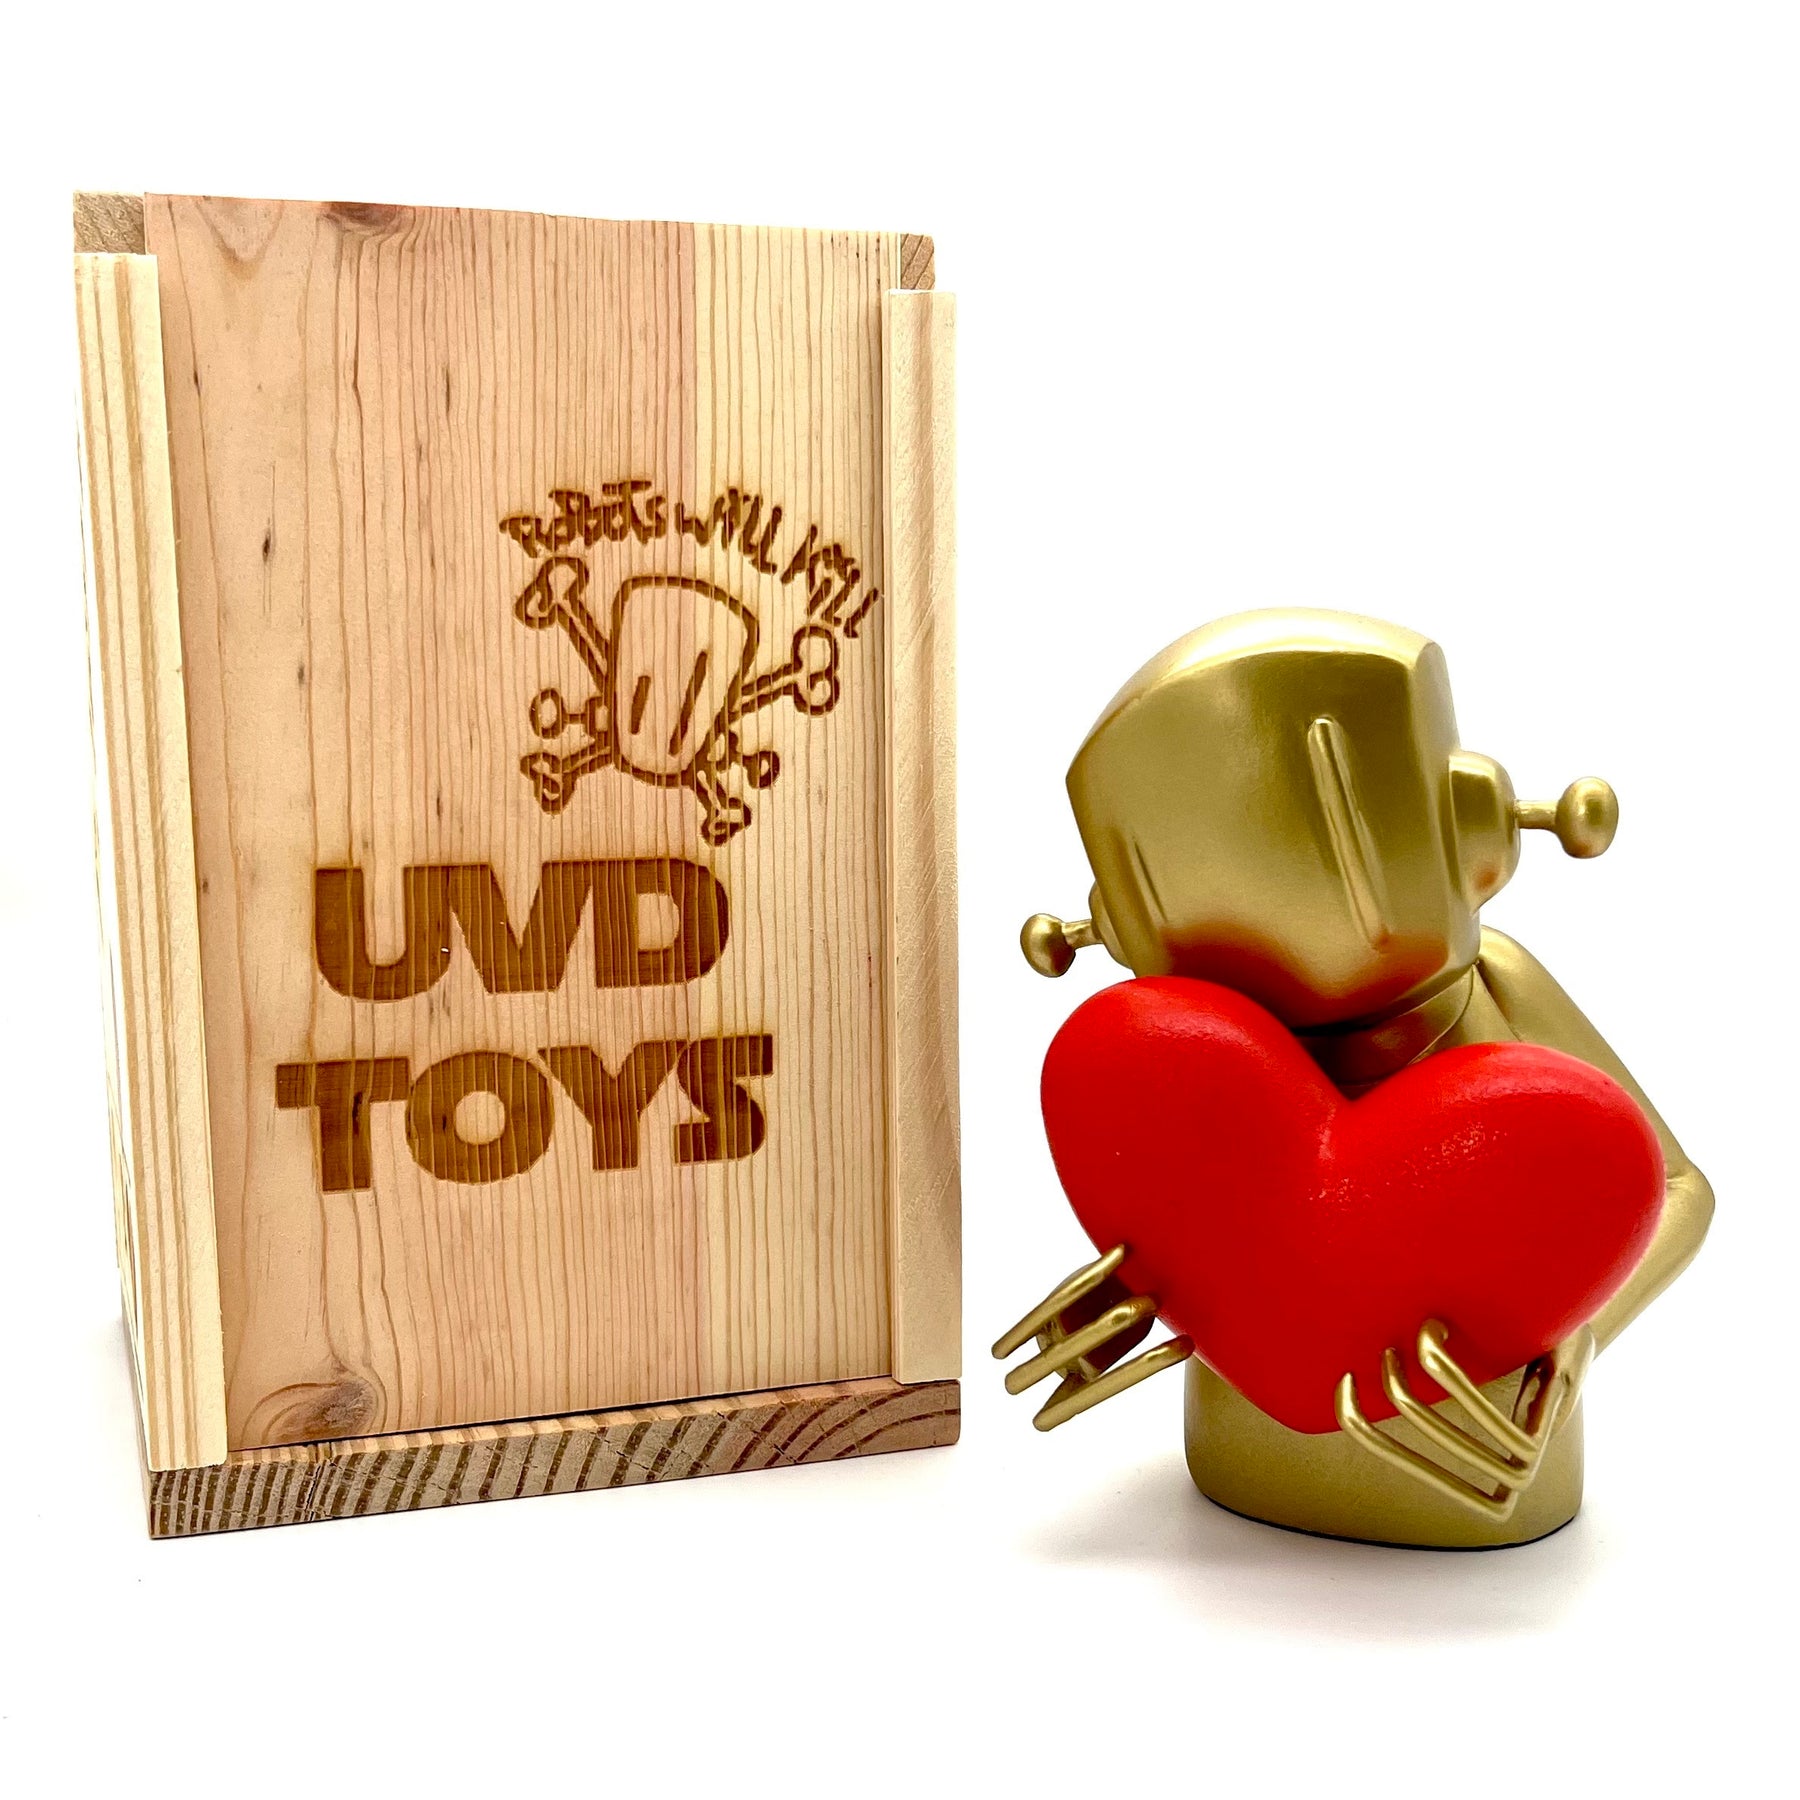 ChrisRWK x UVD Toys Robot w/ Heart Bronze Hand Painted Editions!